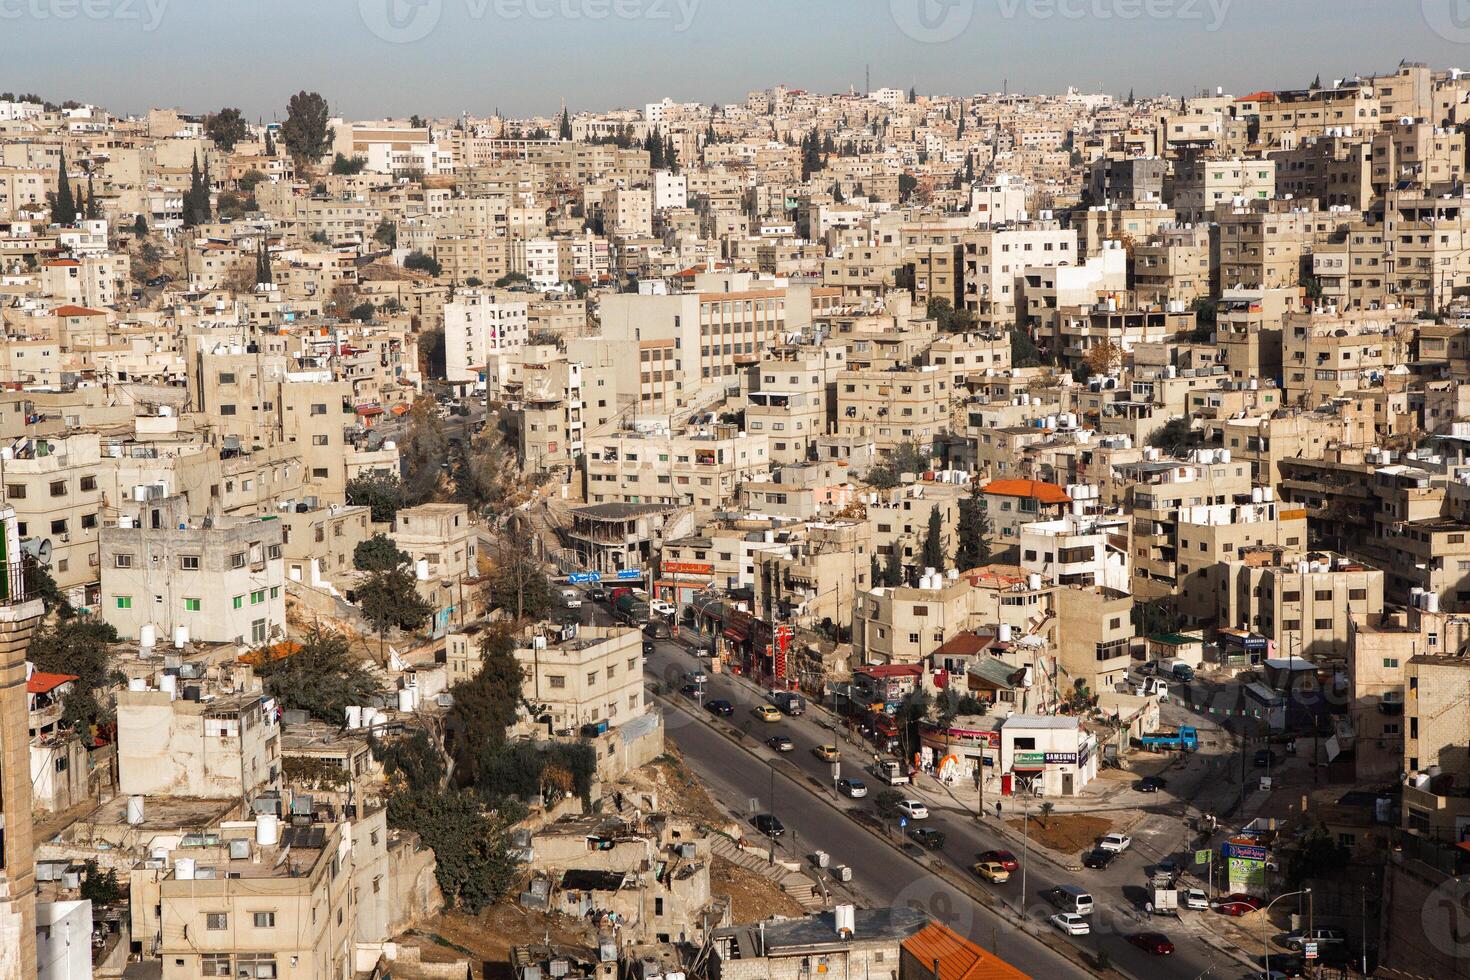 Aerial view of Amman city the capital of Jordan. City scape of Amman. photo